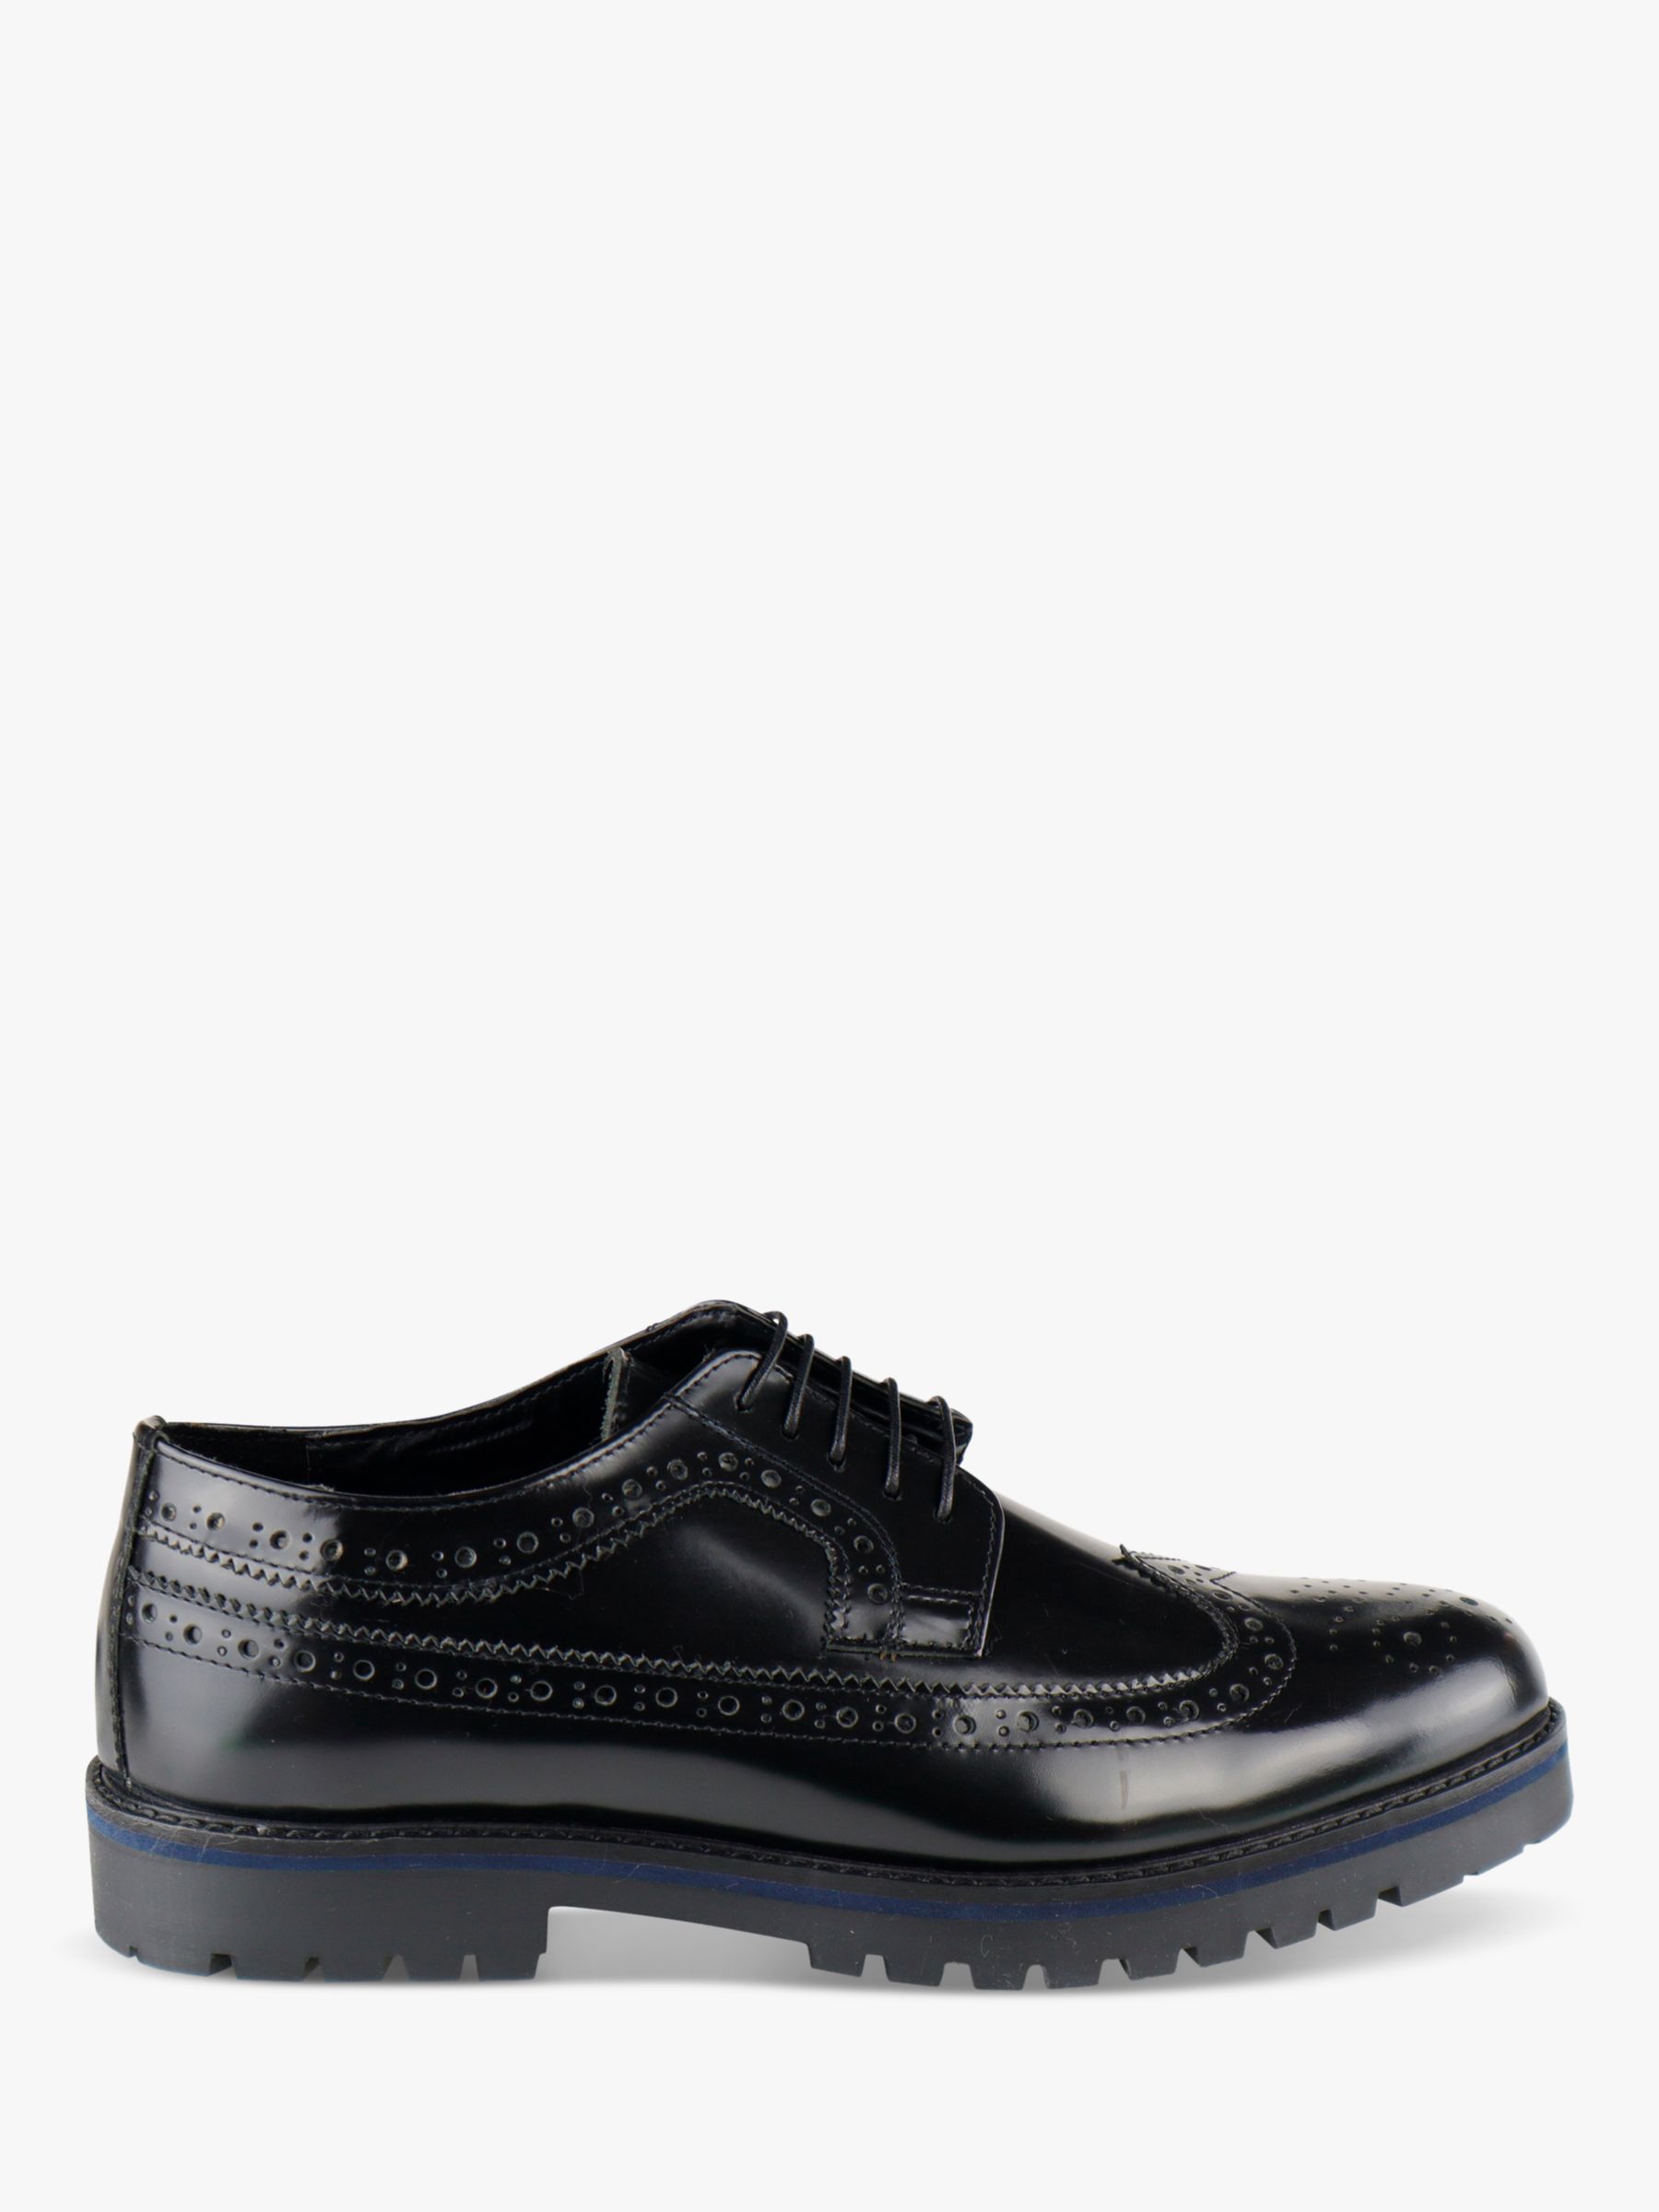 Silver Street London Croxley Leather Formal Brogue Shoes, Black, 7